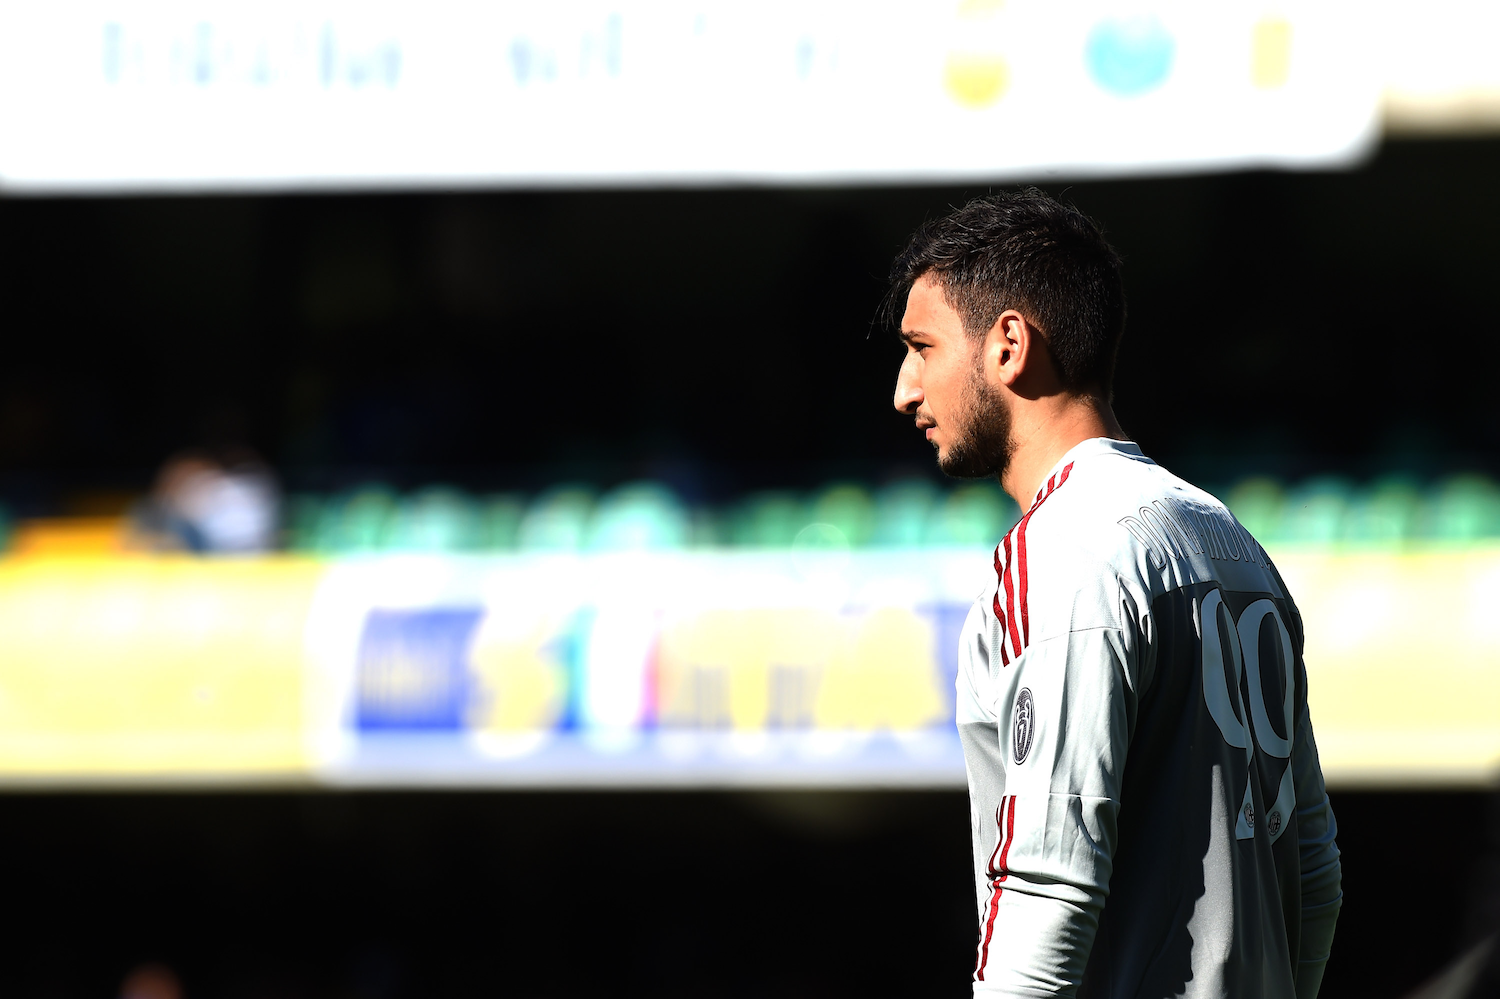 Donnarumma looks on against Hellas Verona (Pier Marco Tacca/Getty Images)